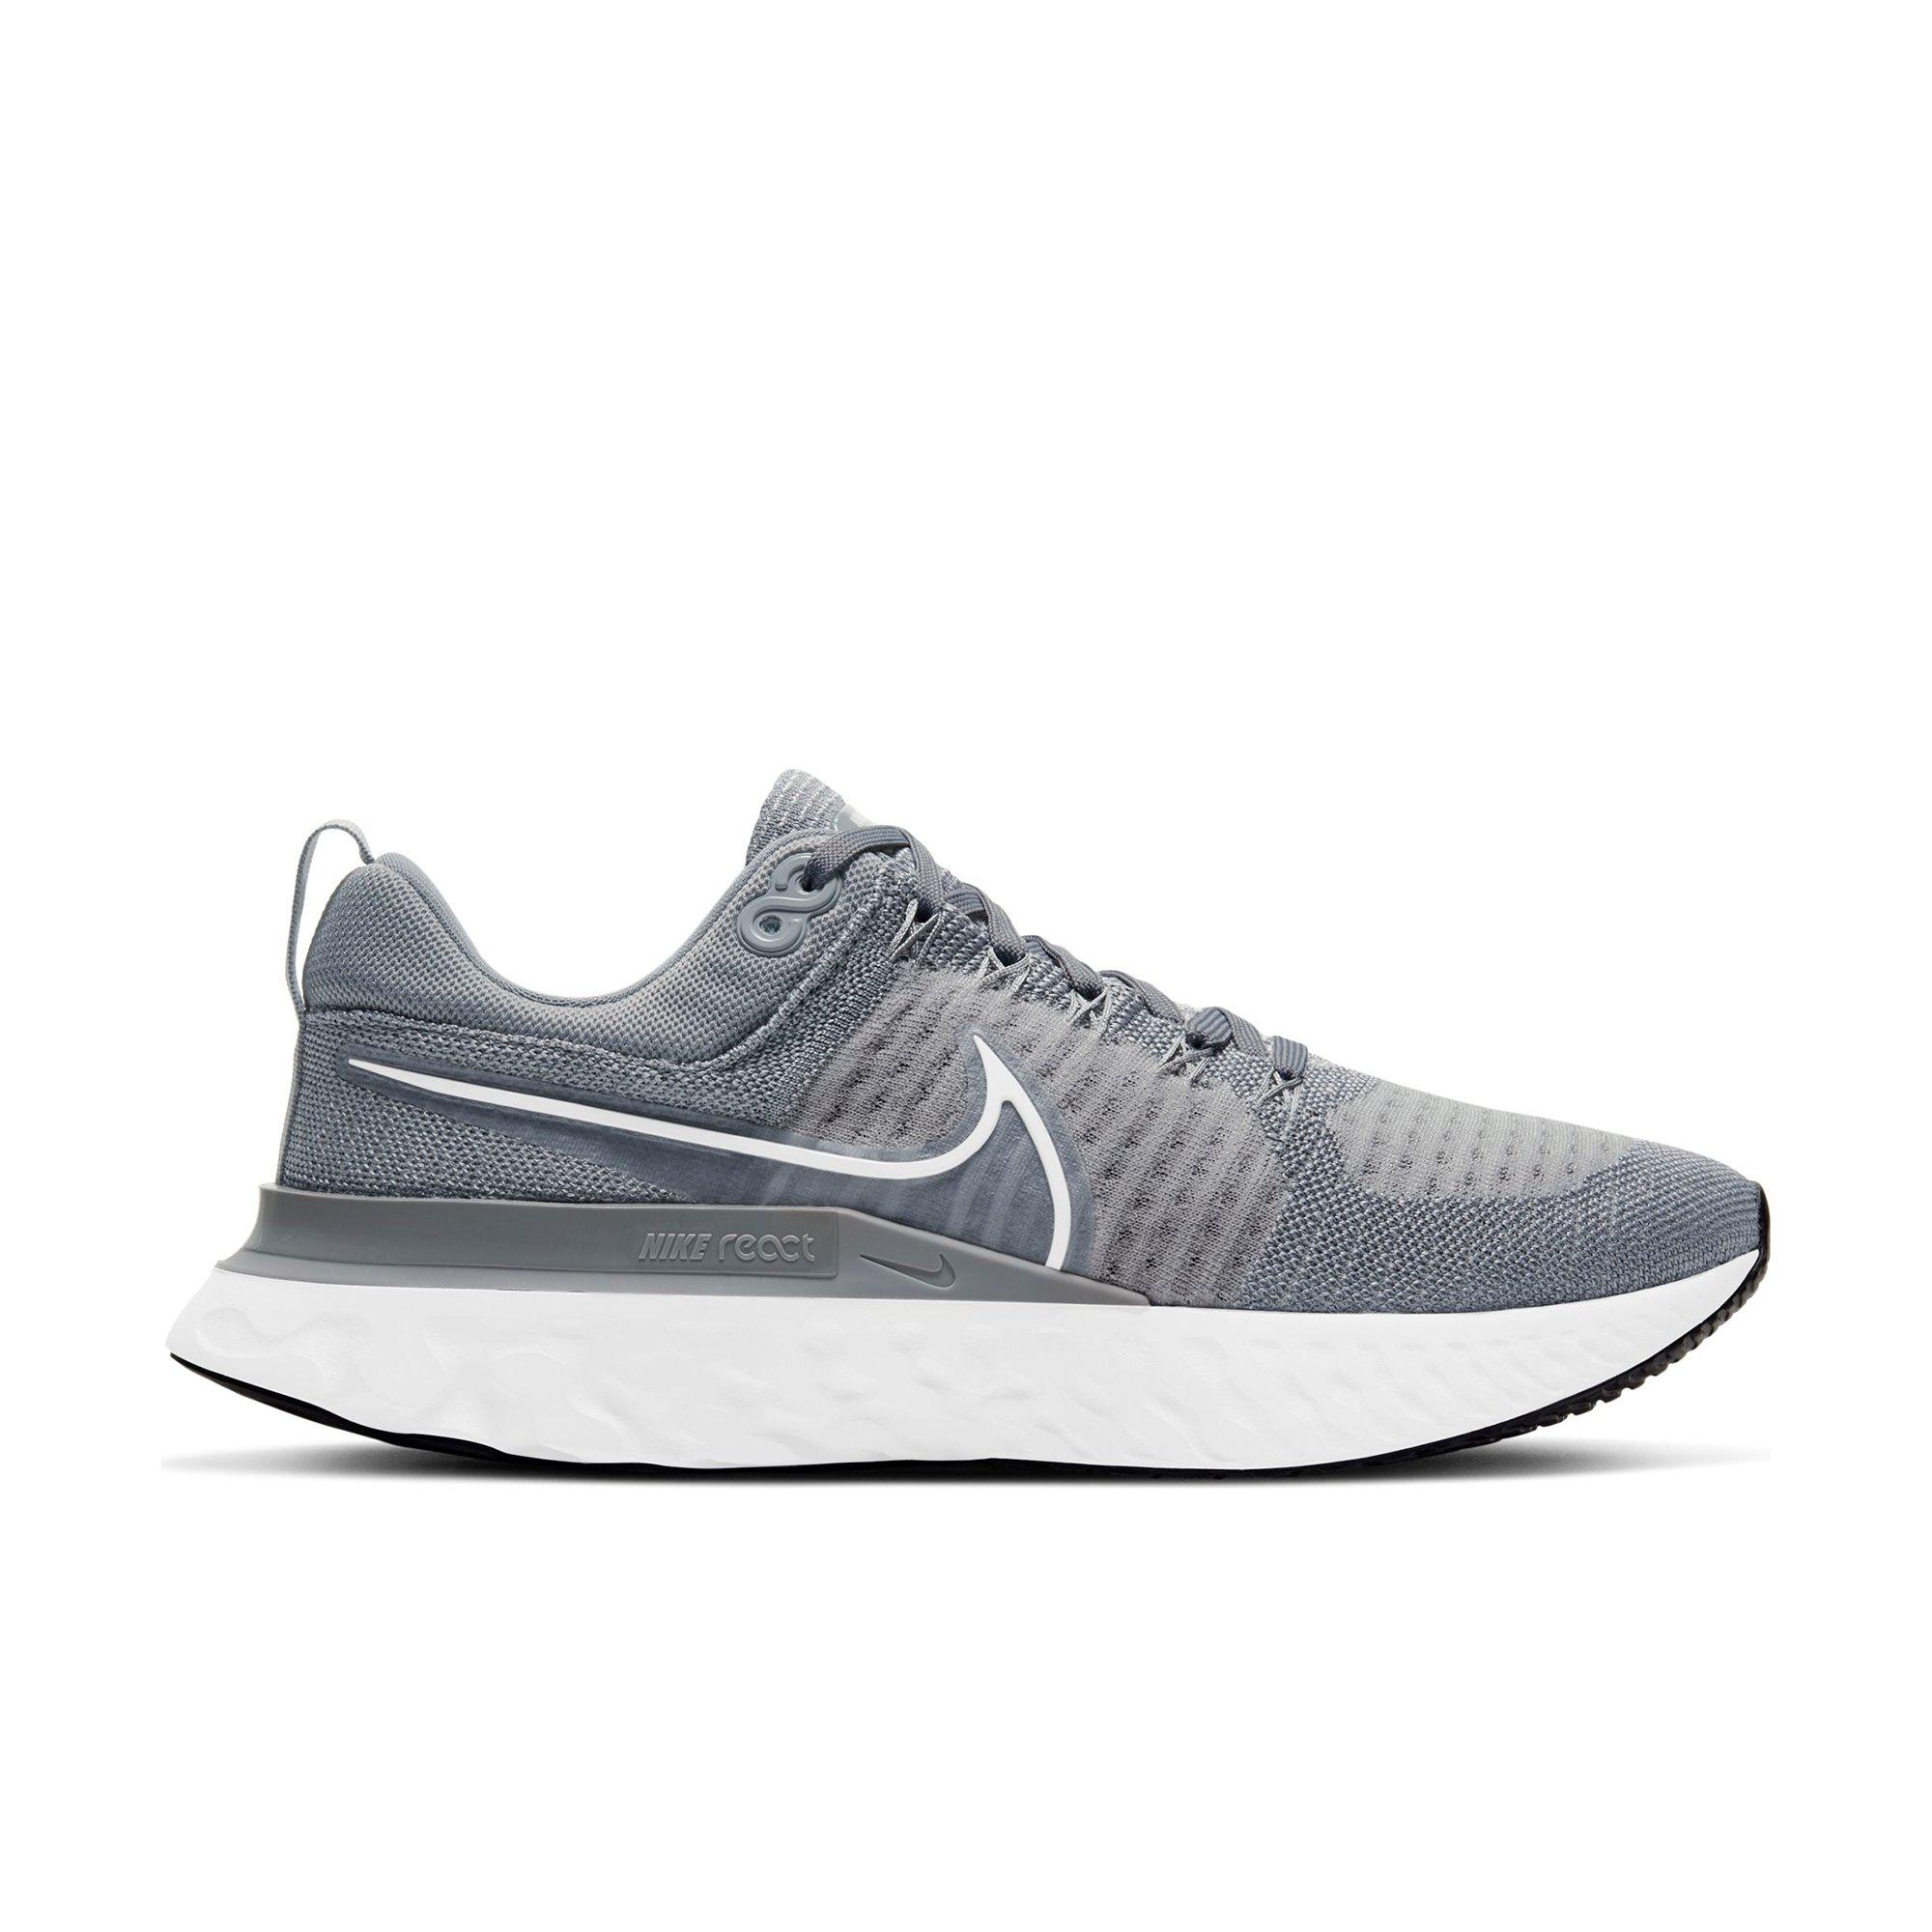 nike react infinity run flyknit 2 mens running shoes particle grey white  grey fog